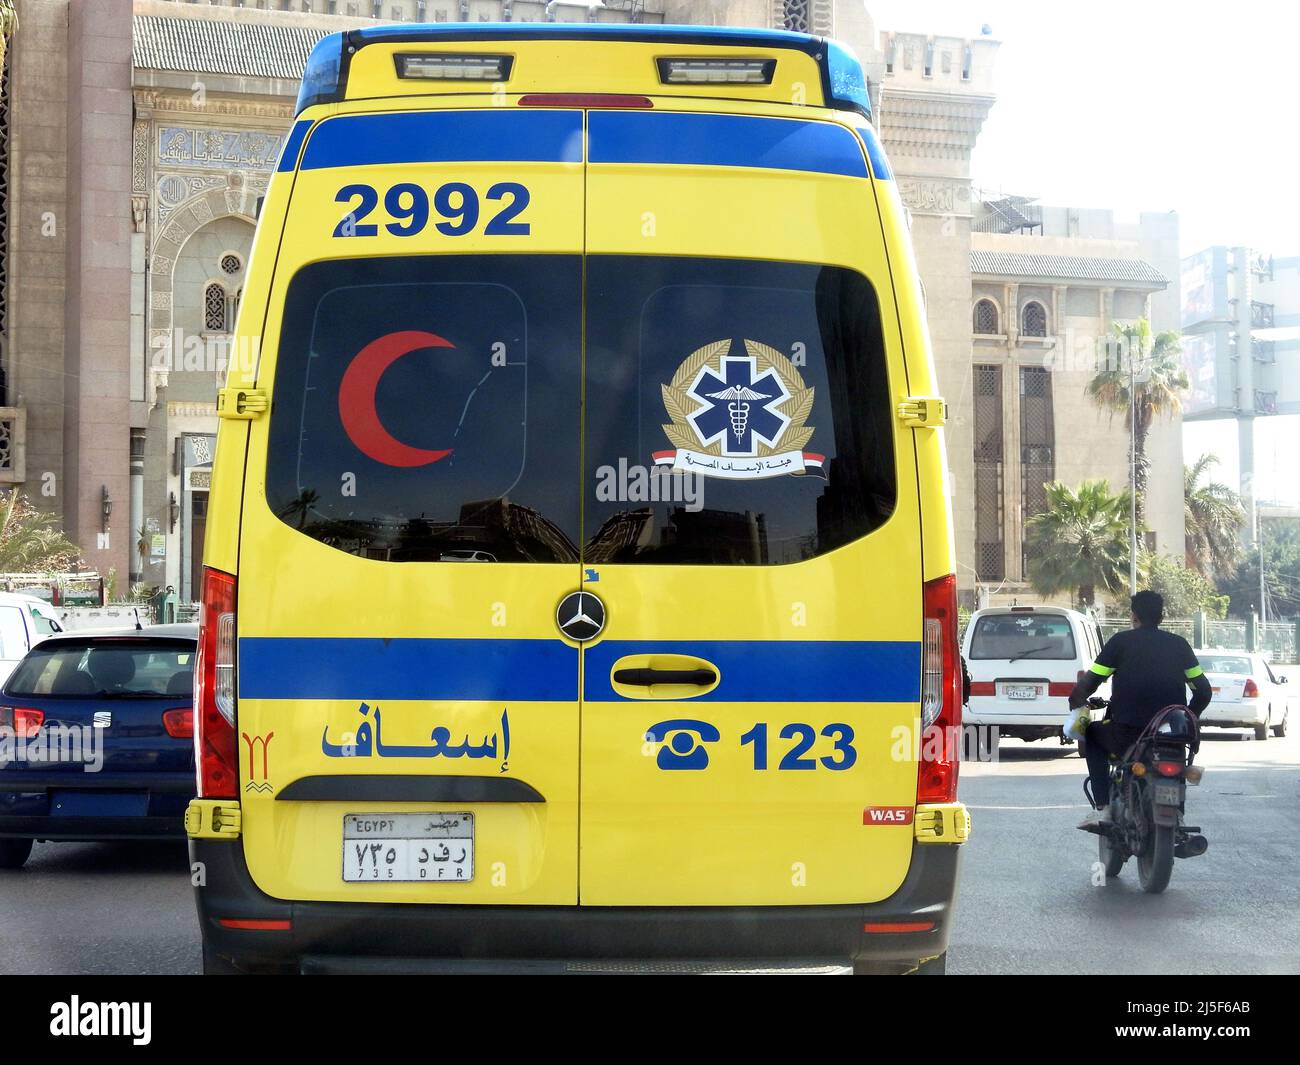 Cairo, Egypt, March 5 2022: Ambulance on the road responding for an emergency call of road accidents, Translation of Arabic text (ministry of health, Stock Photo